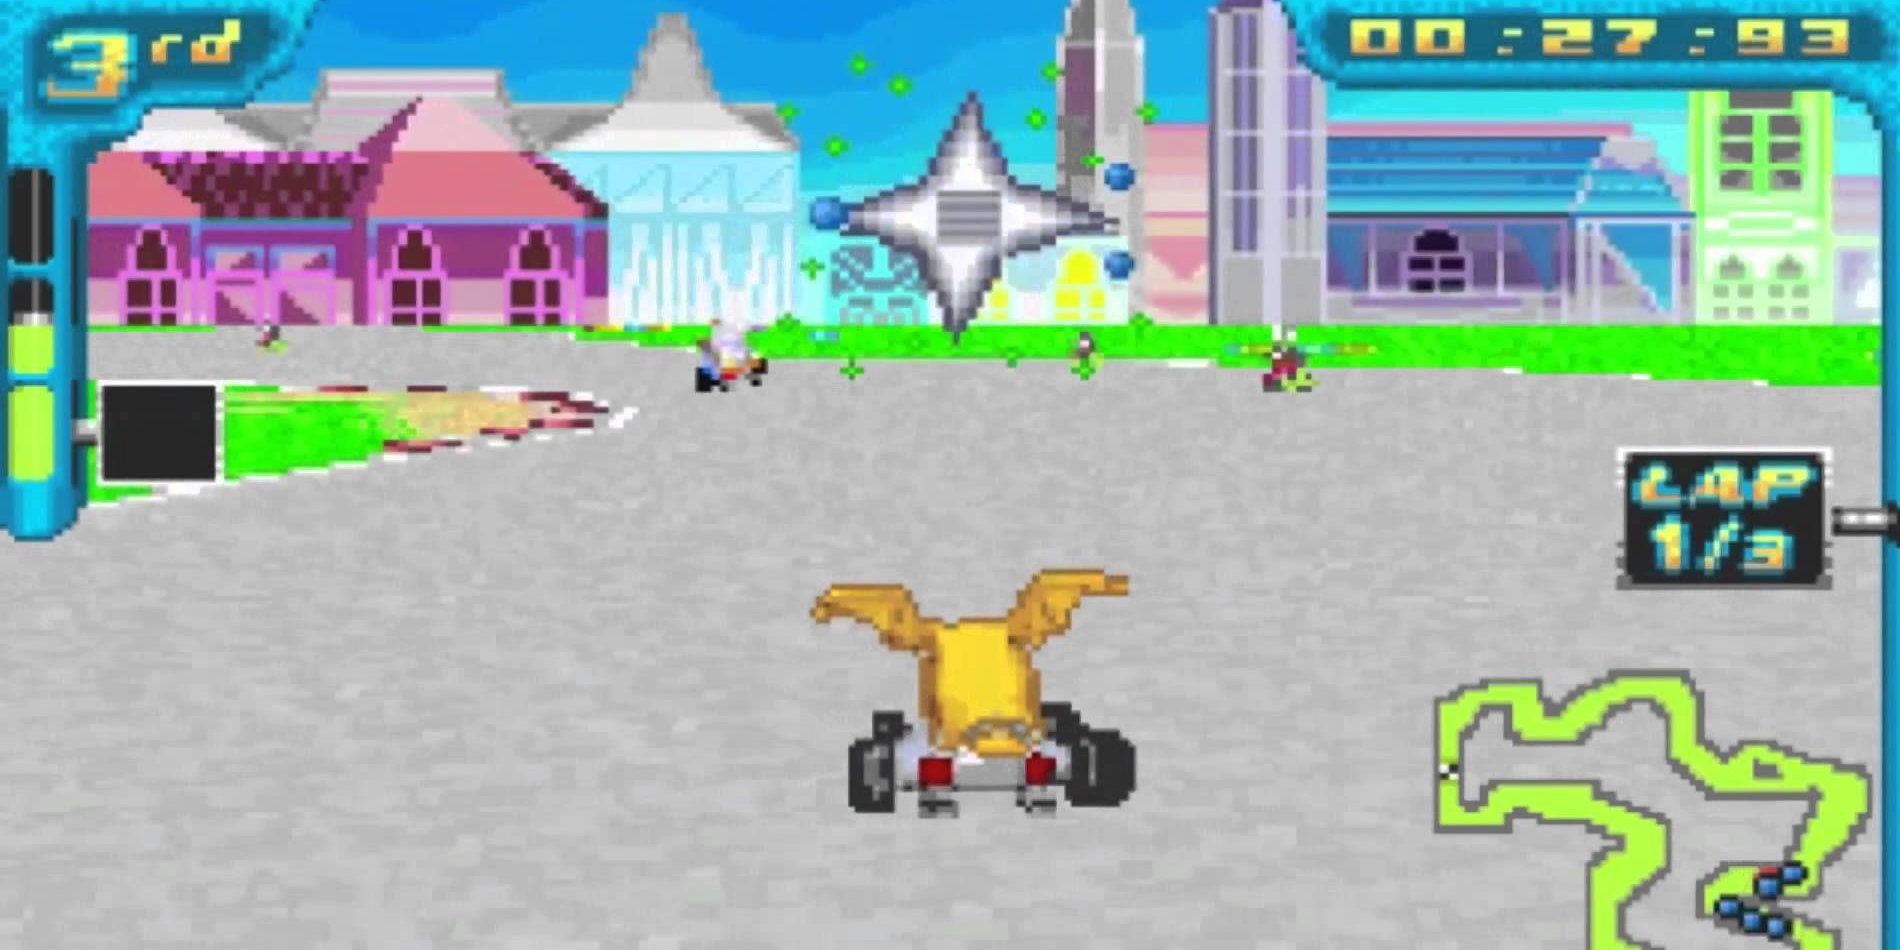 Patamon on the move in Digimon Racing